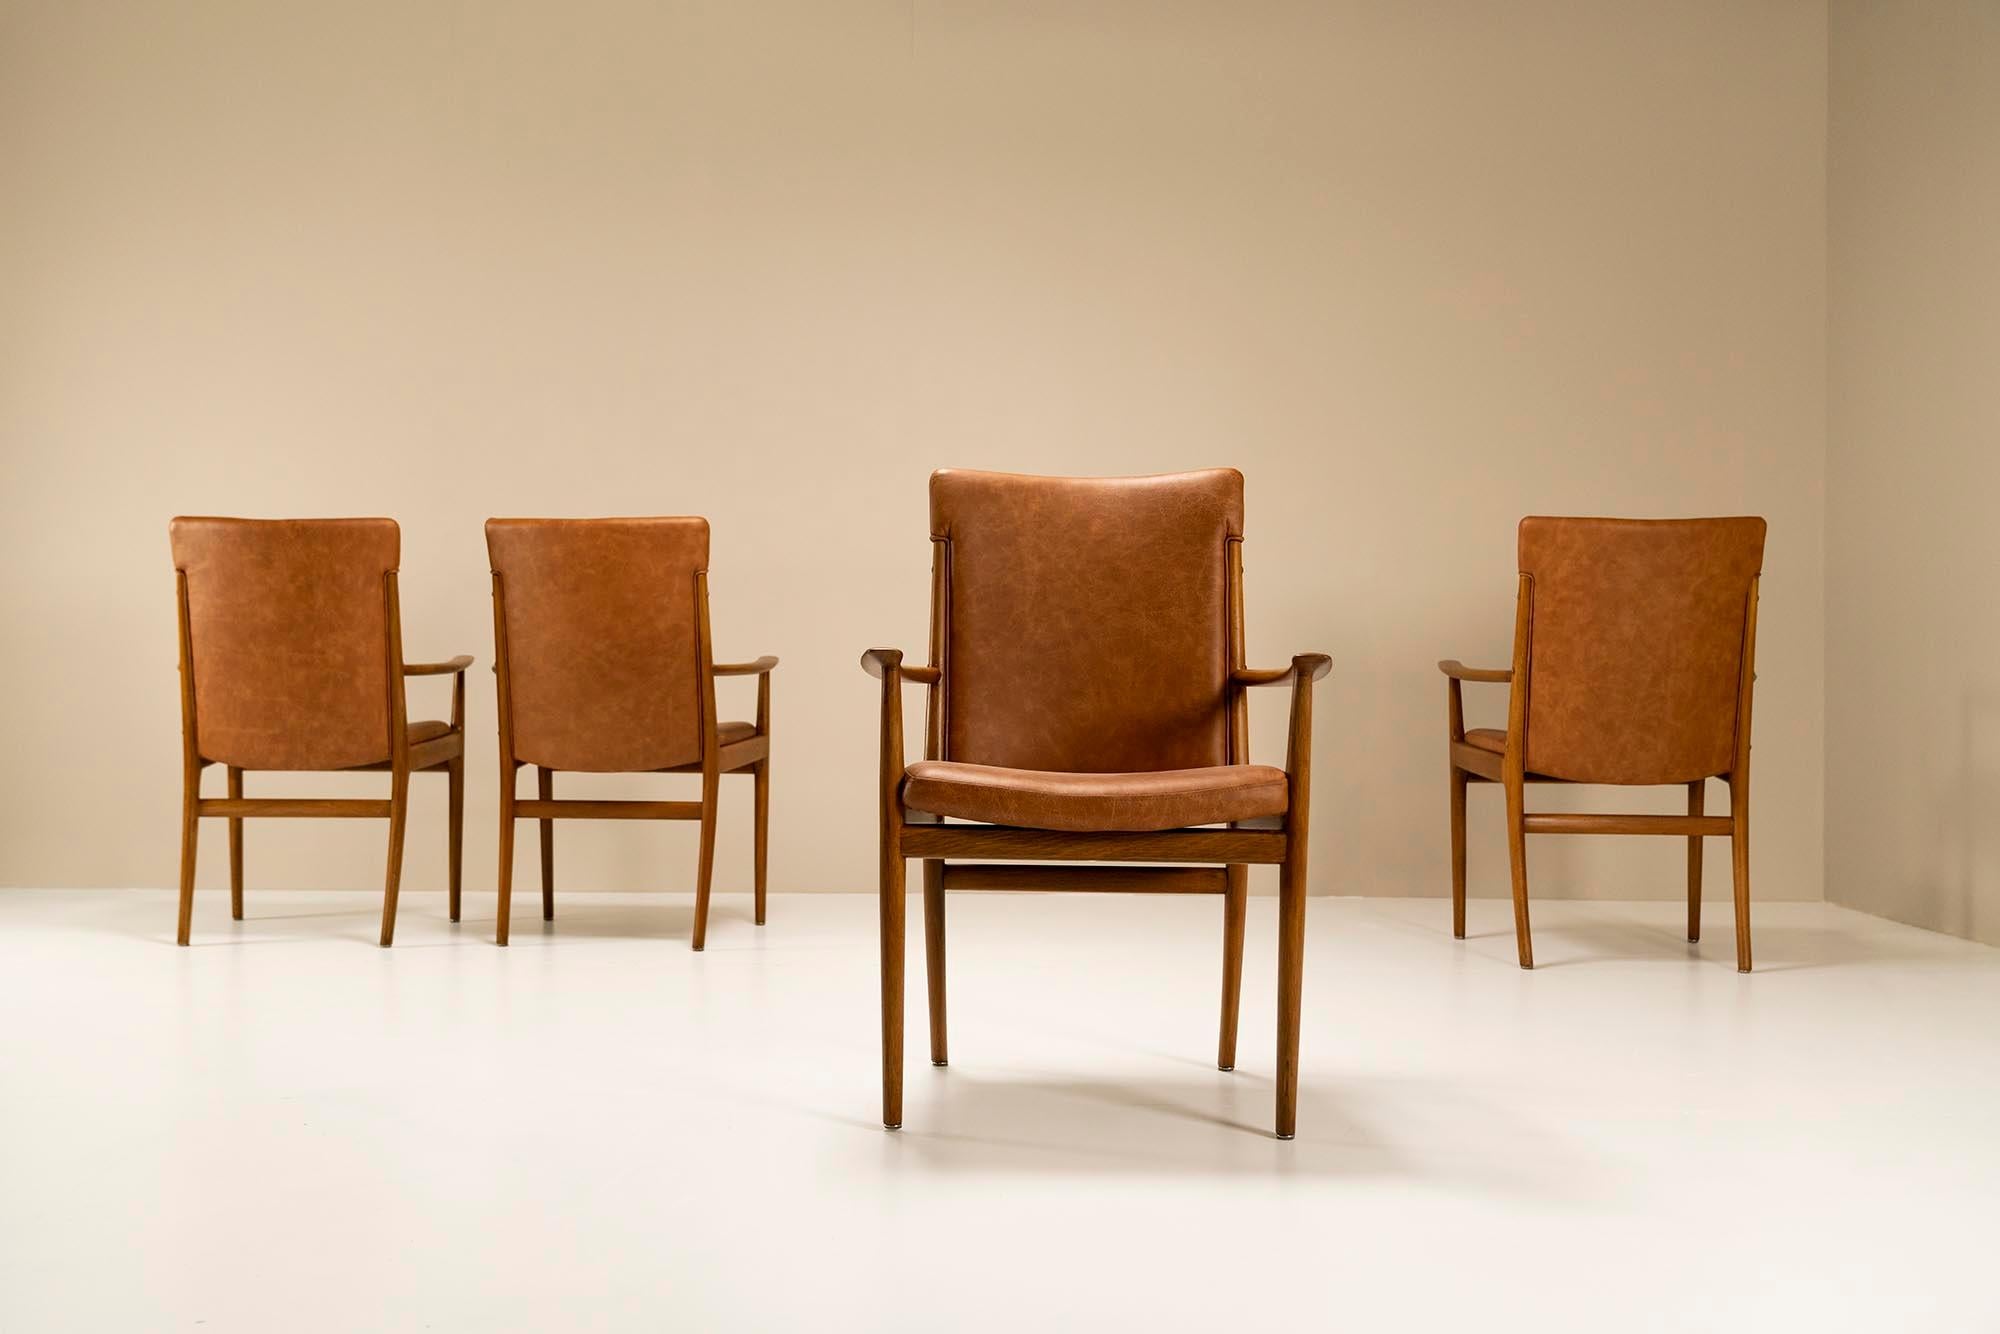 Four beautifully crafted armchairs from Danish designer Kai Lyngfeldt Larsen made and manufactured by Søren Willadsen's factory in the 1960s. Danish ash has been used for this design, which manifests itself in a refined manner. The drawings or